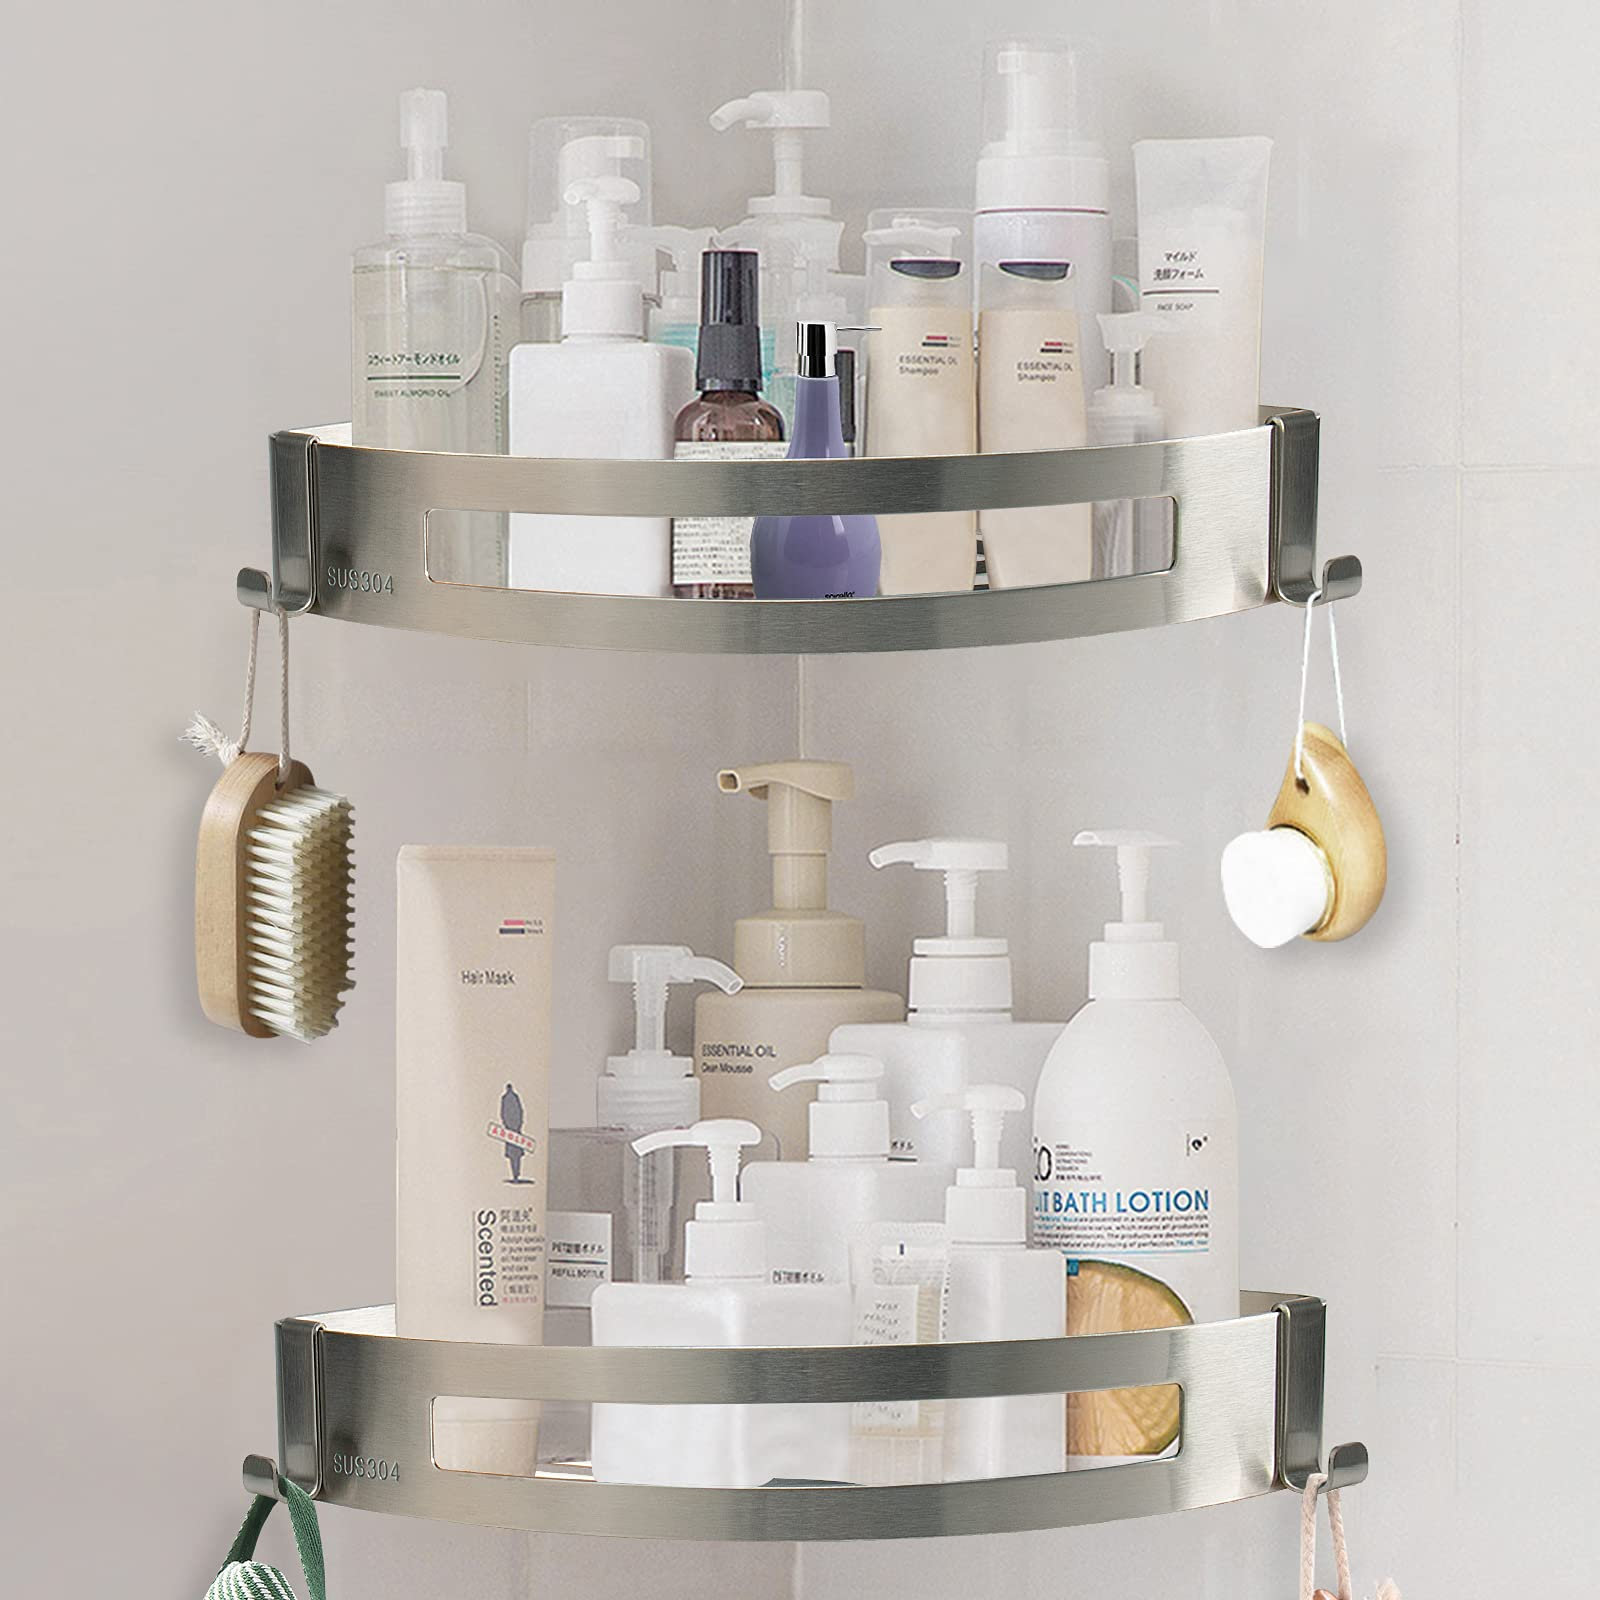 Rebrilliant Ingrun Adhesive Stainless Steel Shower Caddy & Reviews